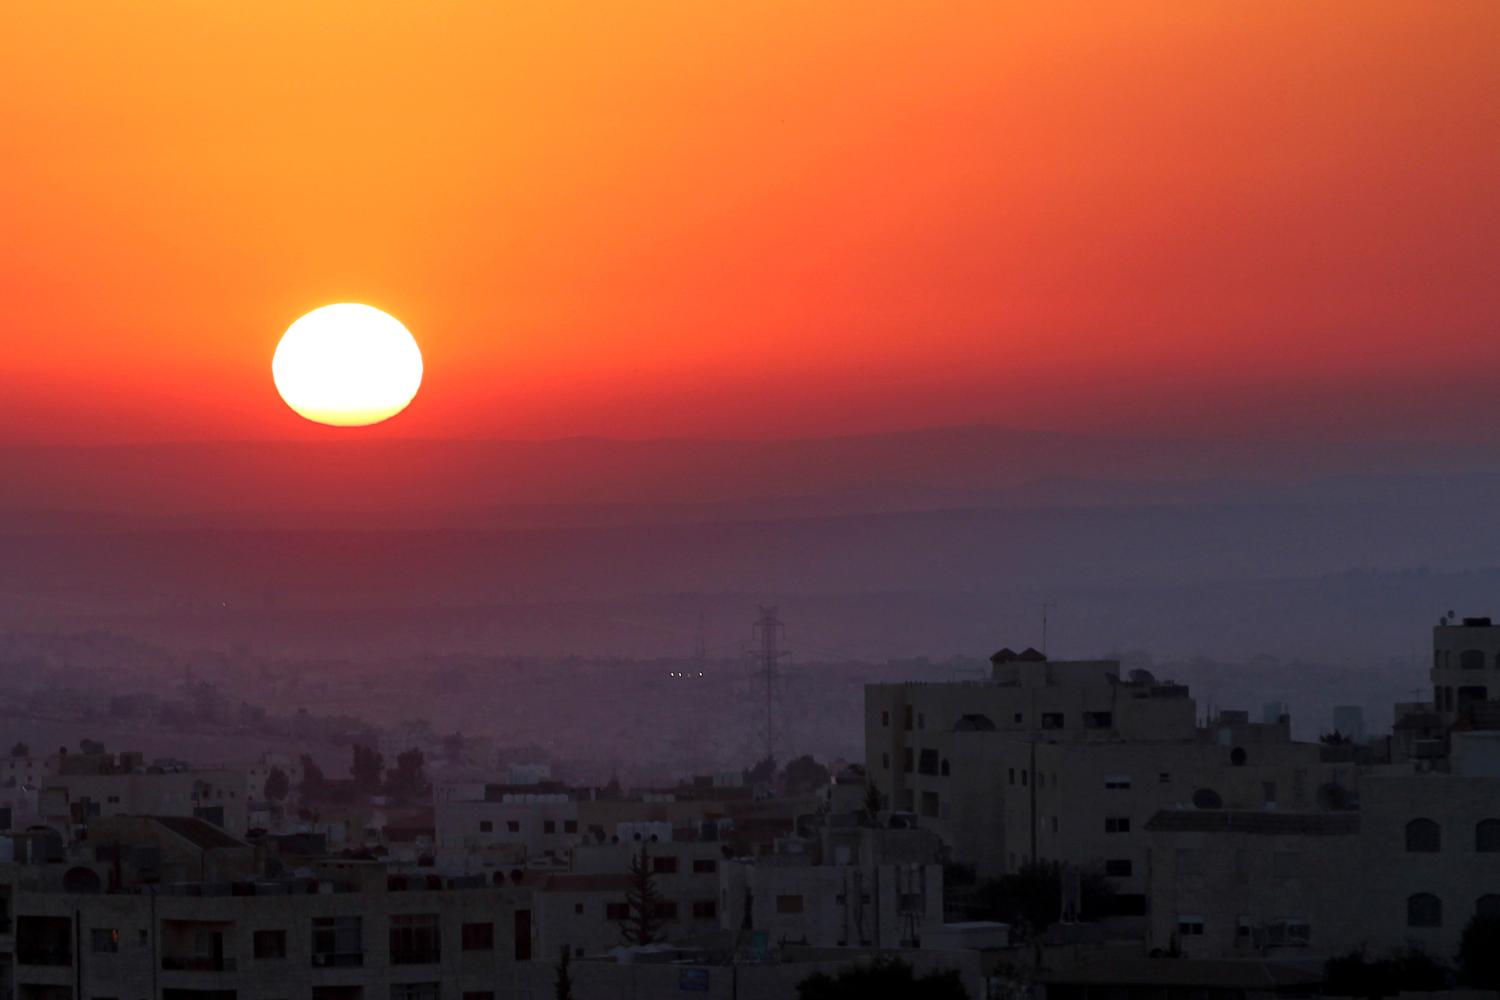 The sun rises on the first day of Eid al-Fitr in Amman August 19, 2012. Eid-al-Fitr marks the end of Ramadan, the holiest month on the Islamic calendar.  REUTERS/Muhammad Hamed (JORDAN - Tags: CITYSPACE ENVIRONMENT RELIGION)